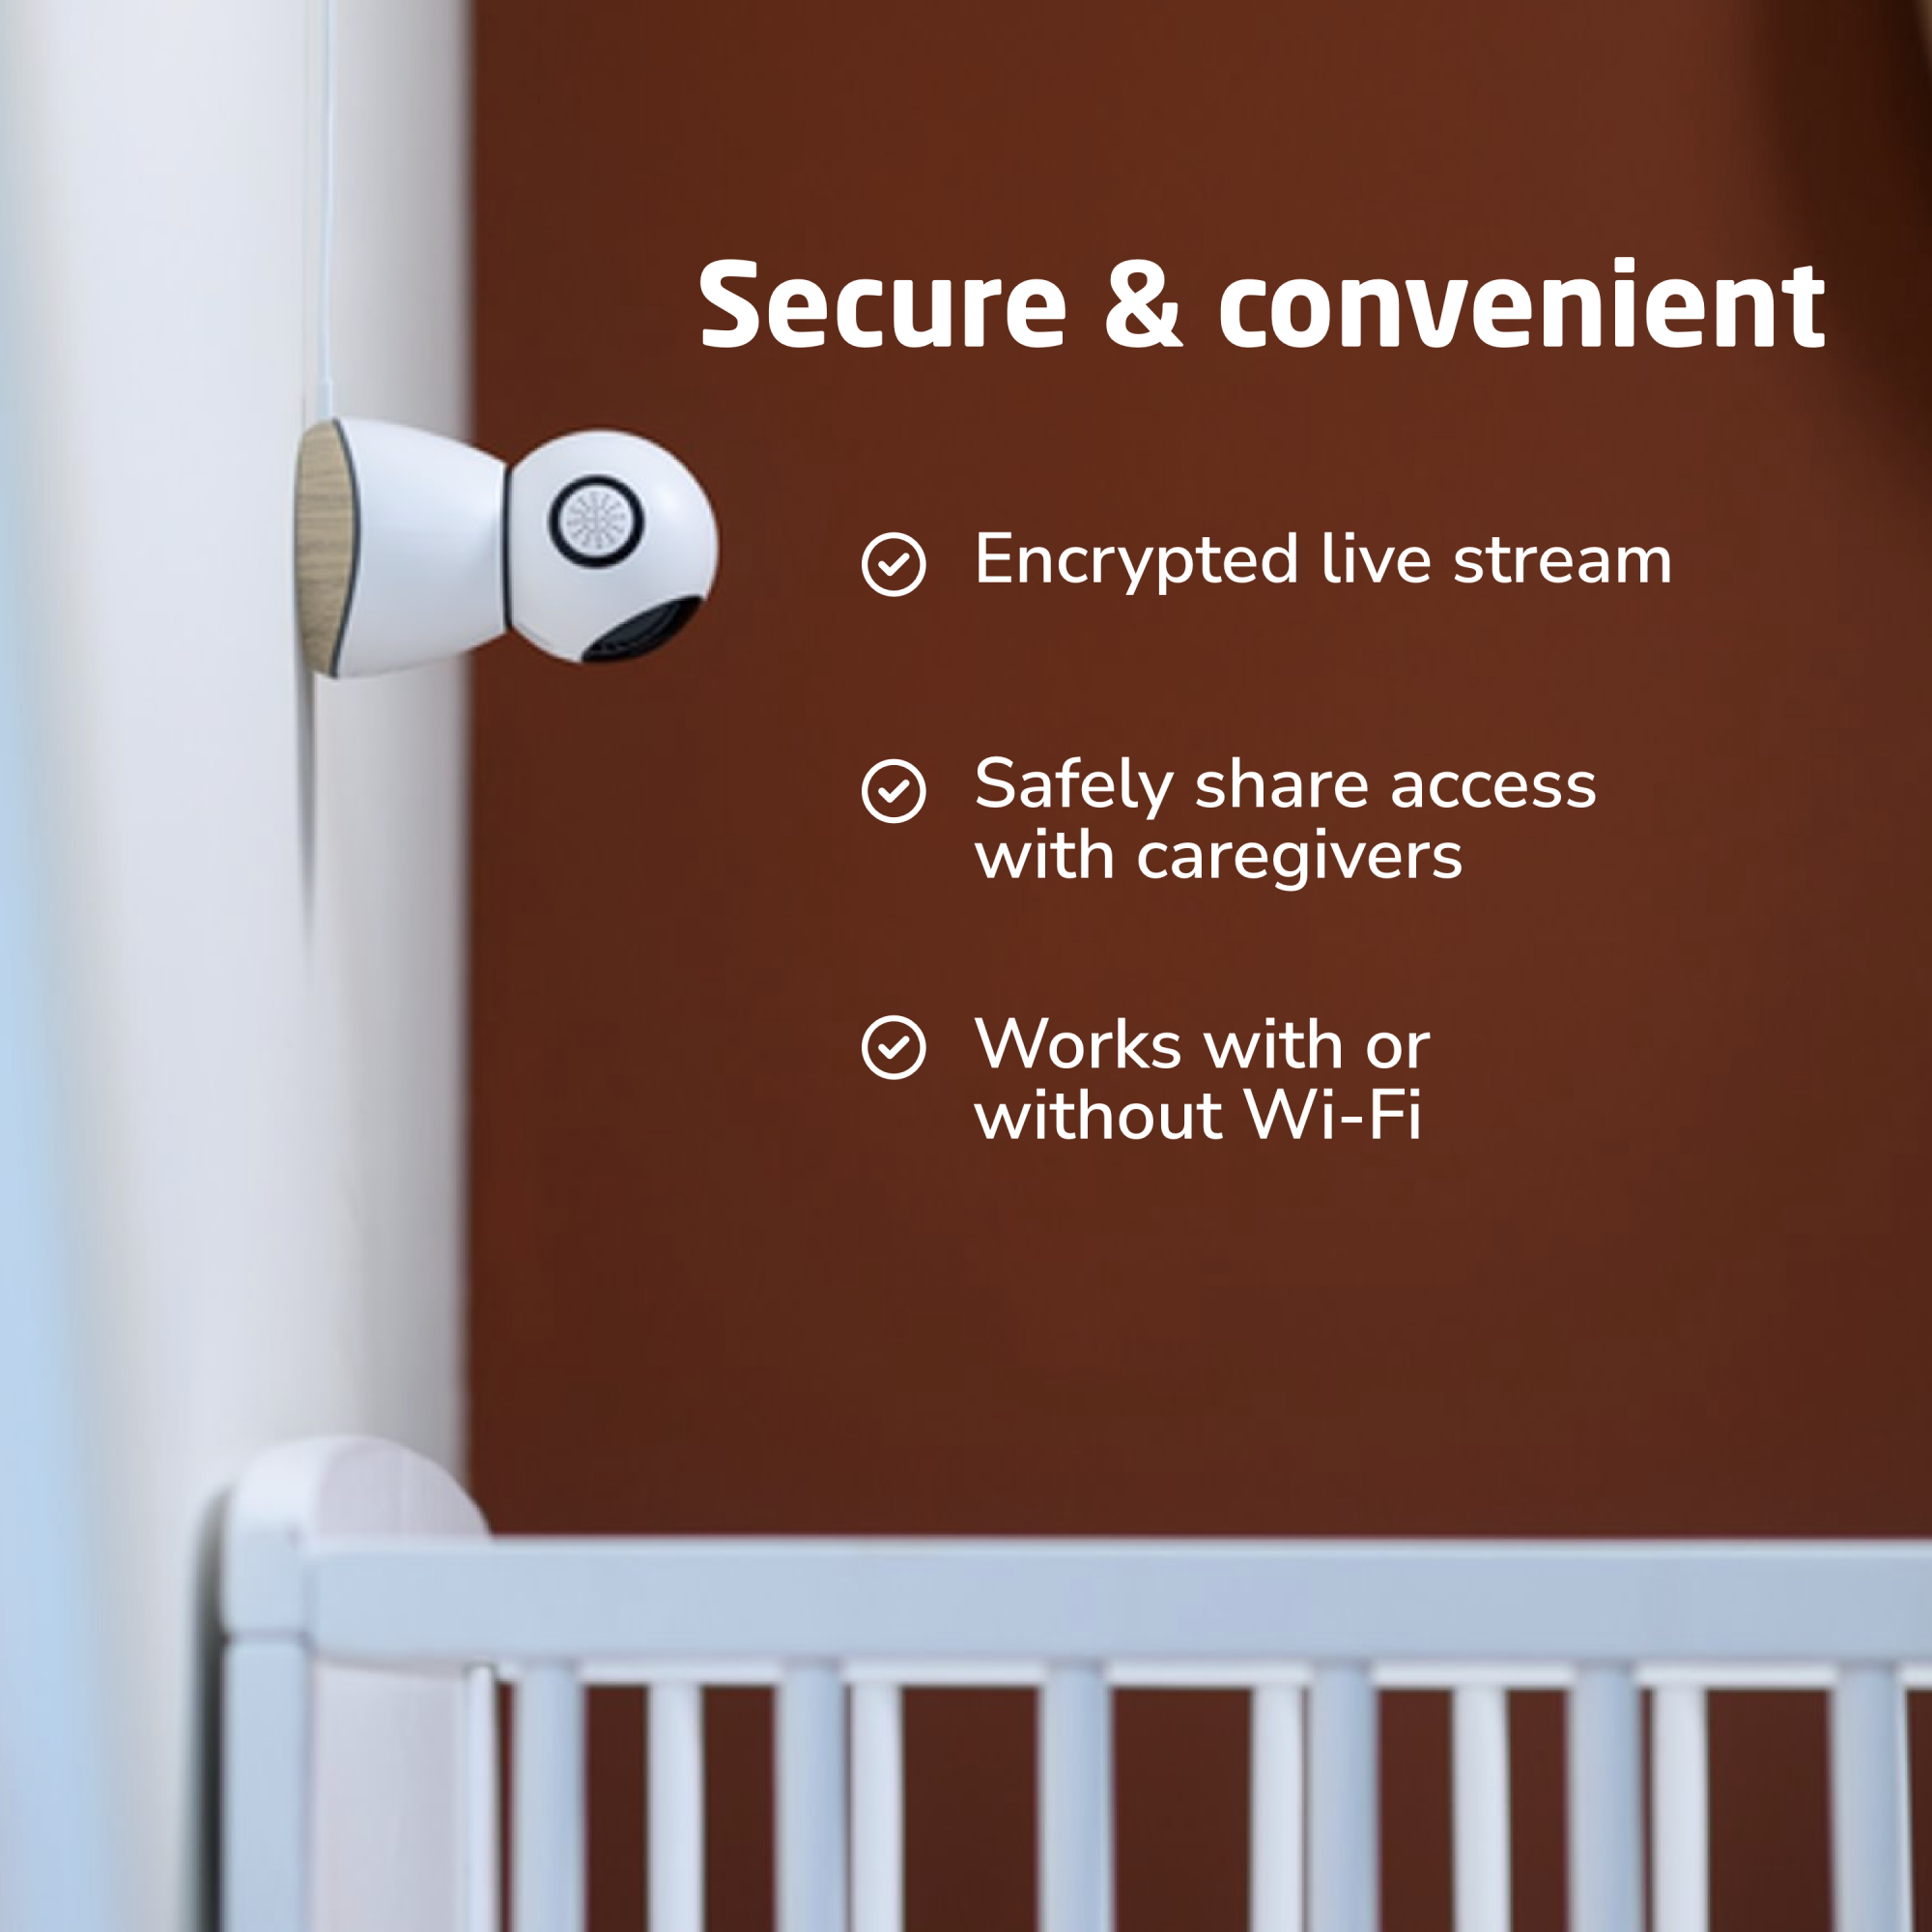 See Pro 360° Baby Monitor - Secure & convenient: encrypted live stream, safely share access with caregivers, works with or without Wi-Fi